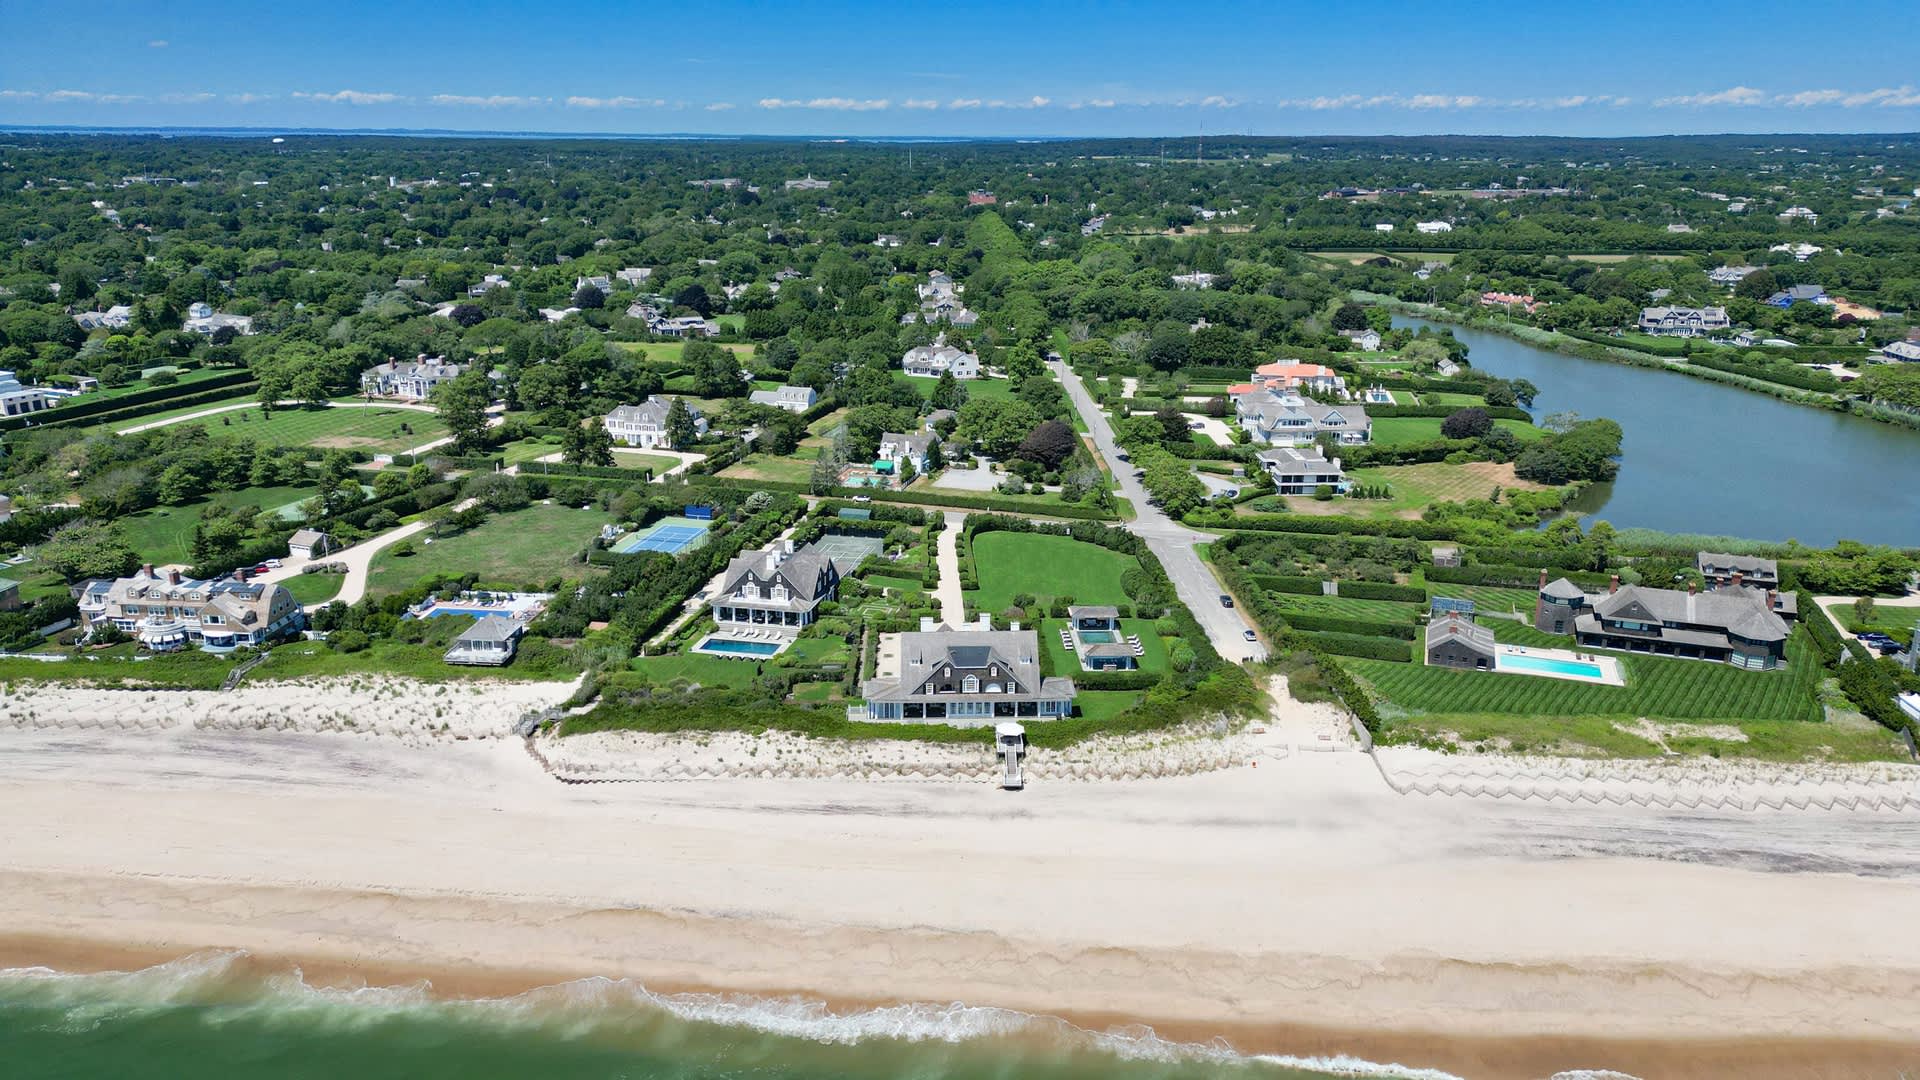 Aerial view of the La Dune estate from over the ocean.